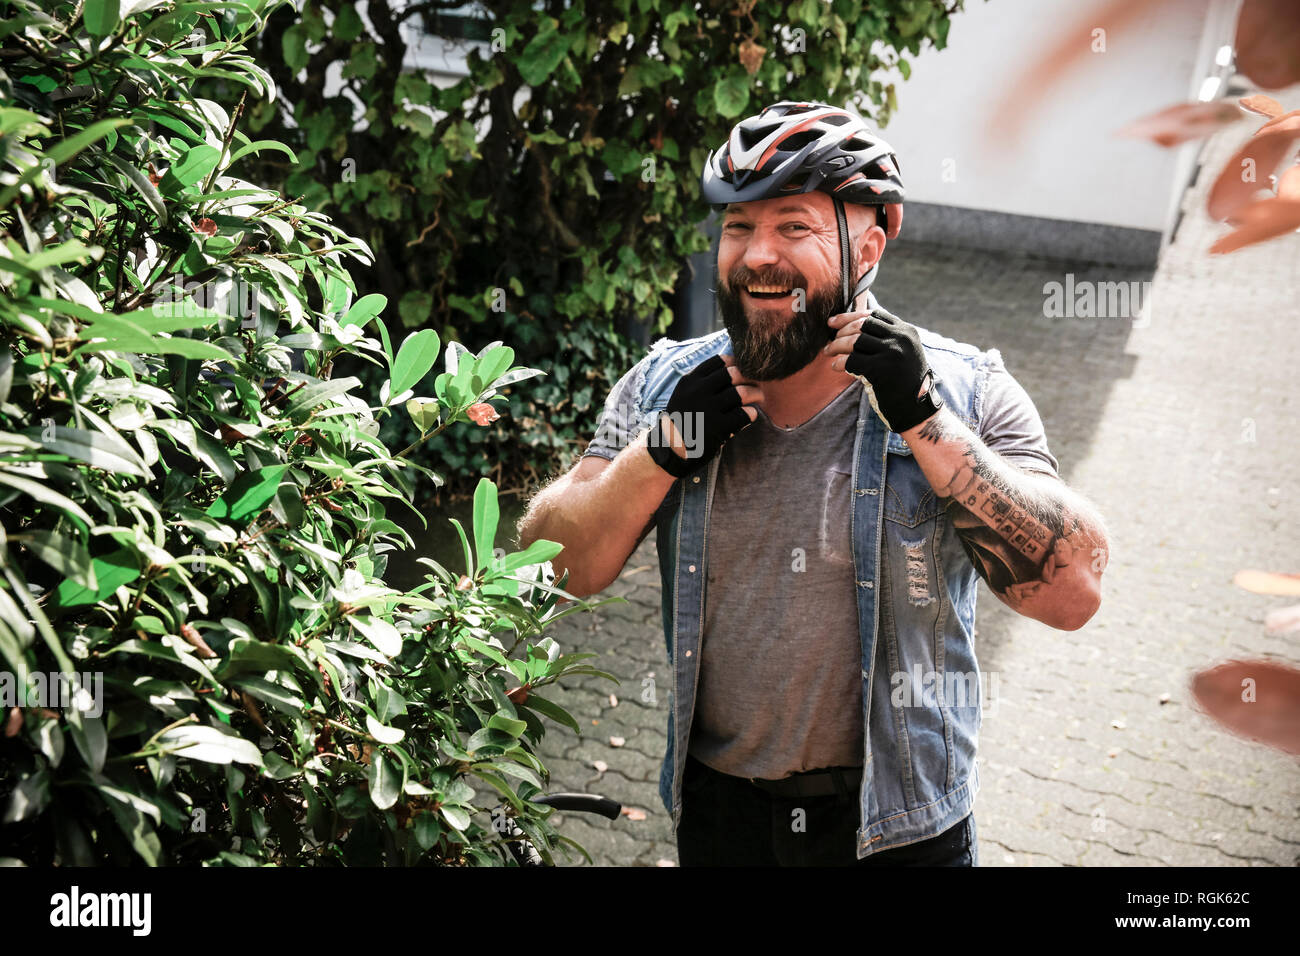 Portrait of laughing man putting on bicycle helmet Stock Photo